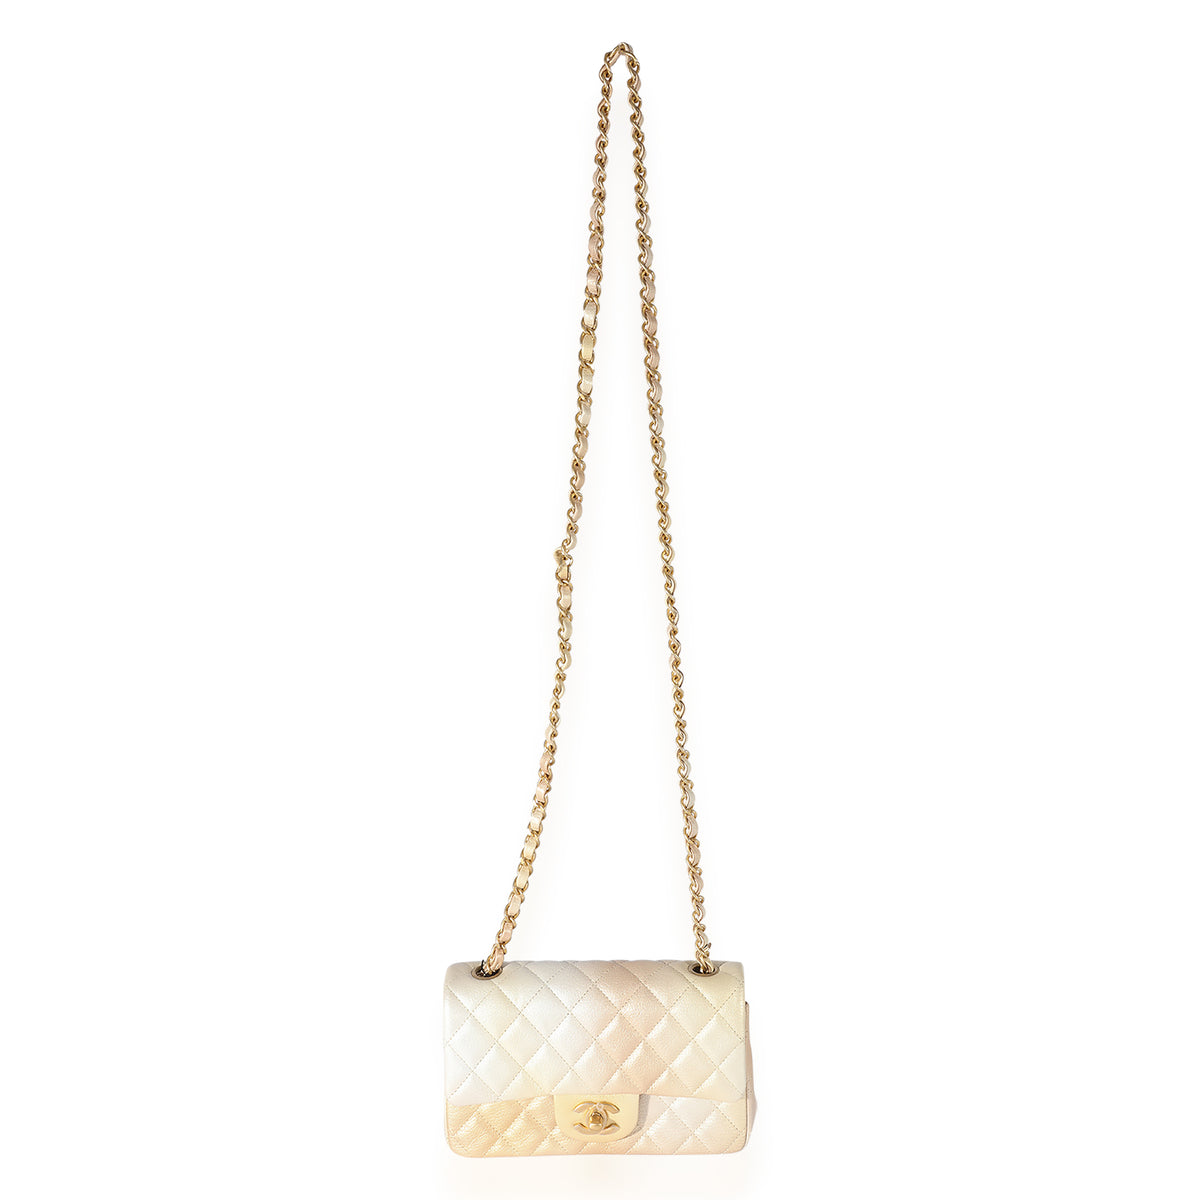 Chanel White Quilted Calfskin Chain Top Handle Flap Bag, myGemma, SG